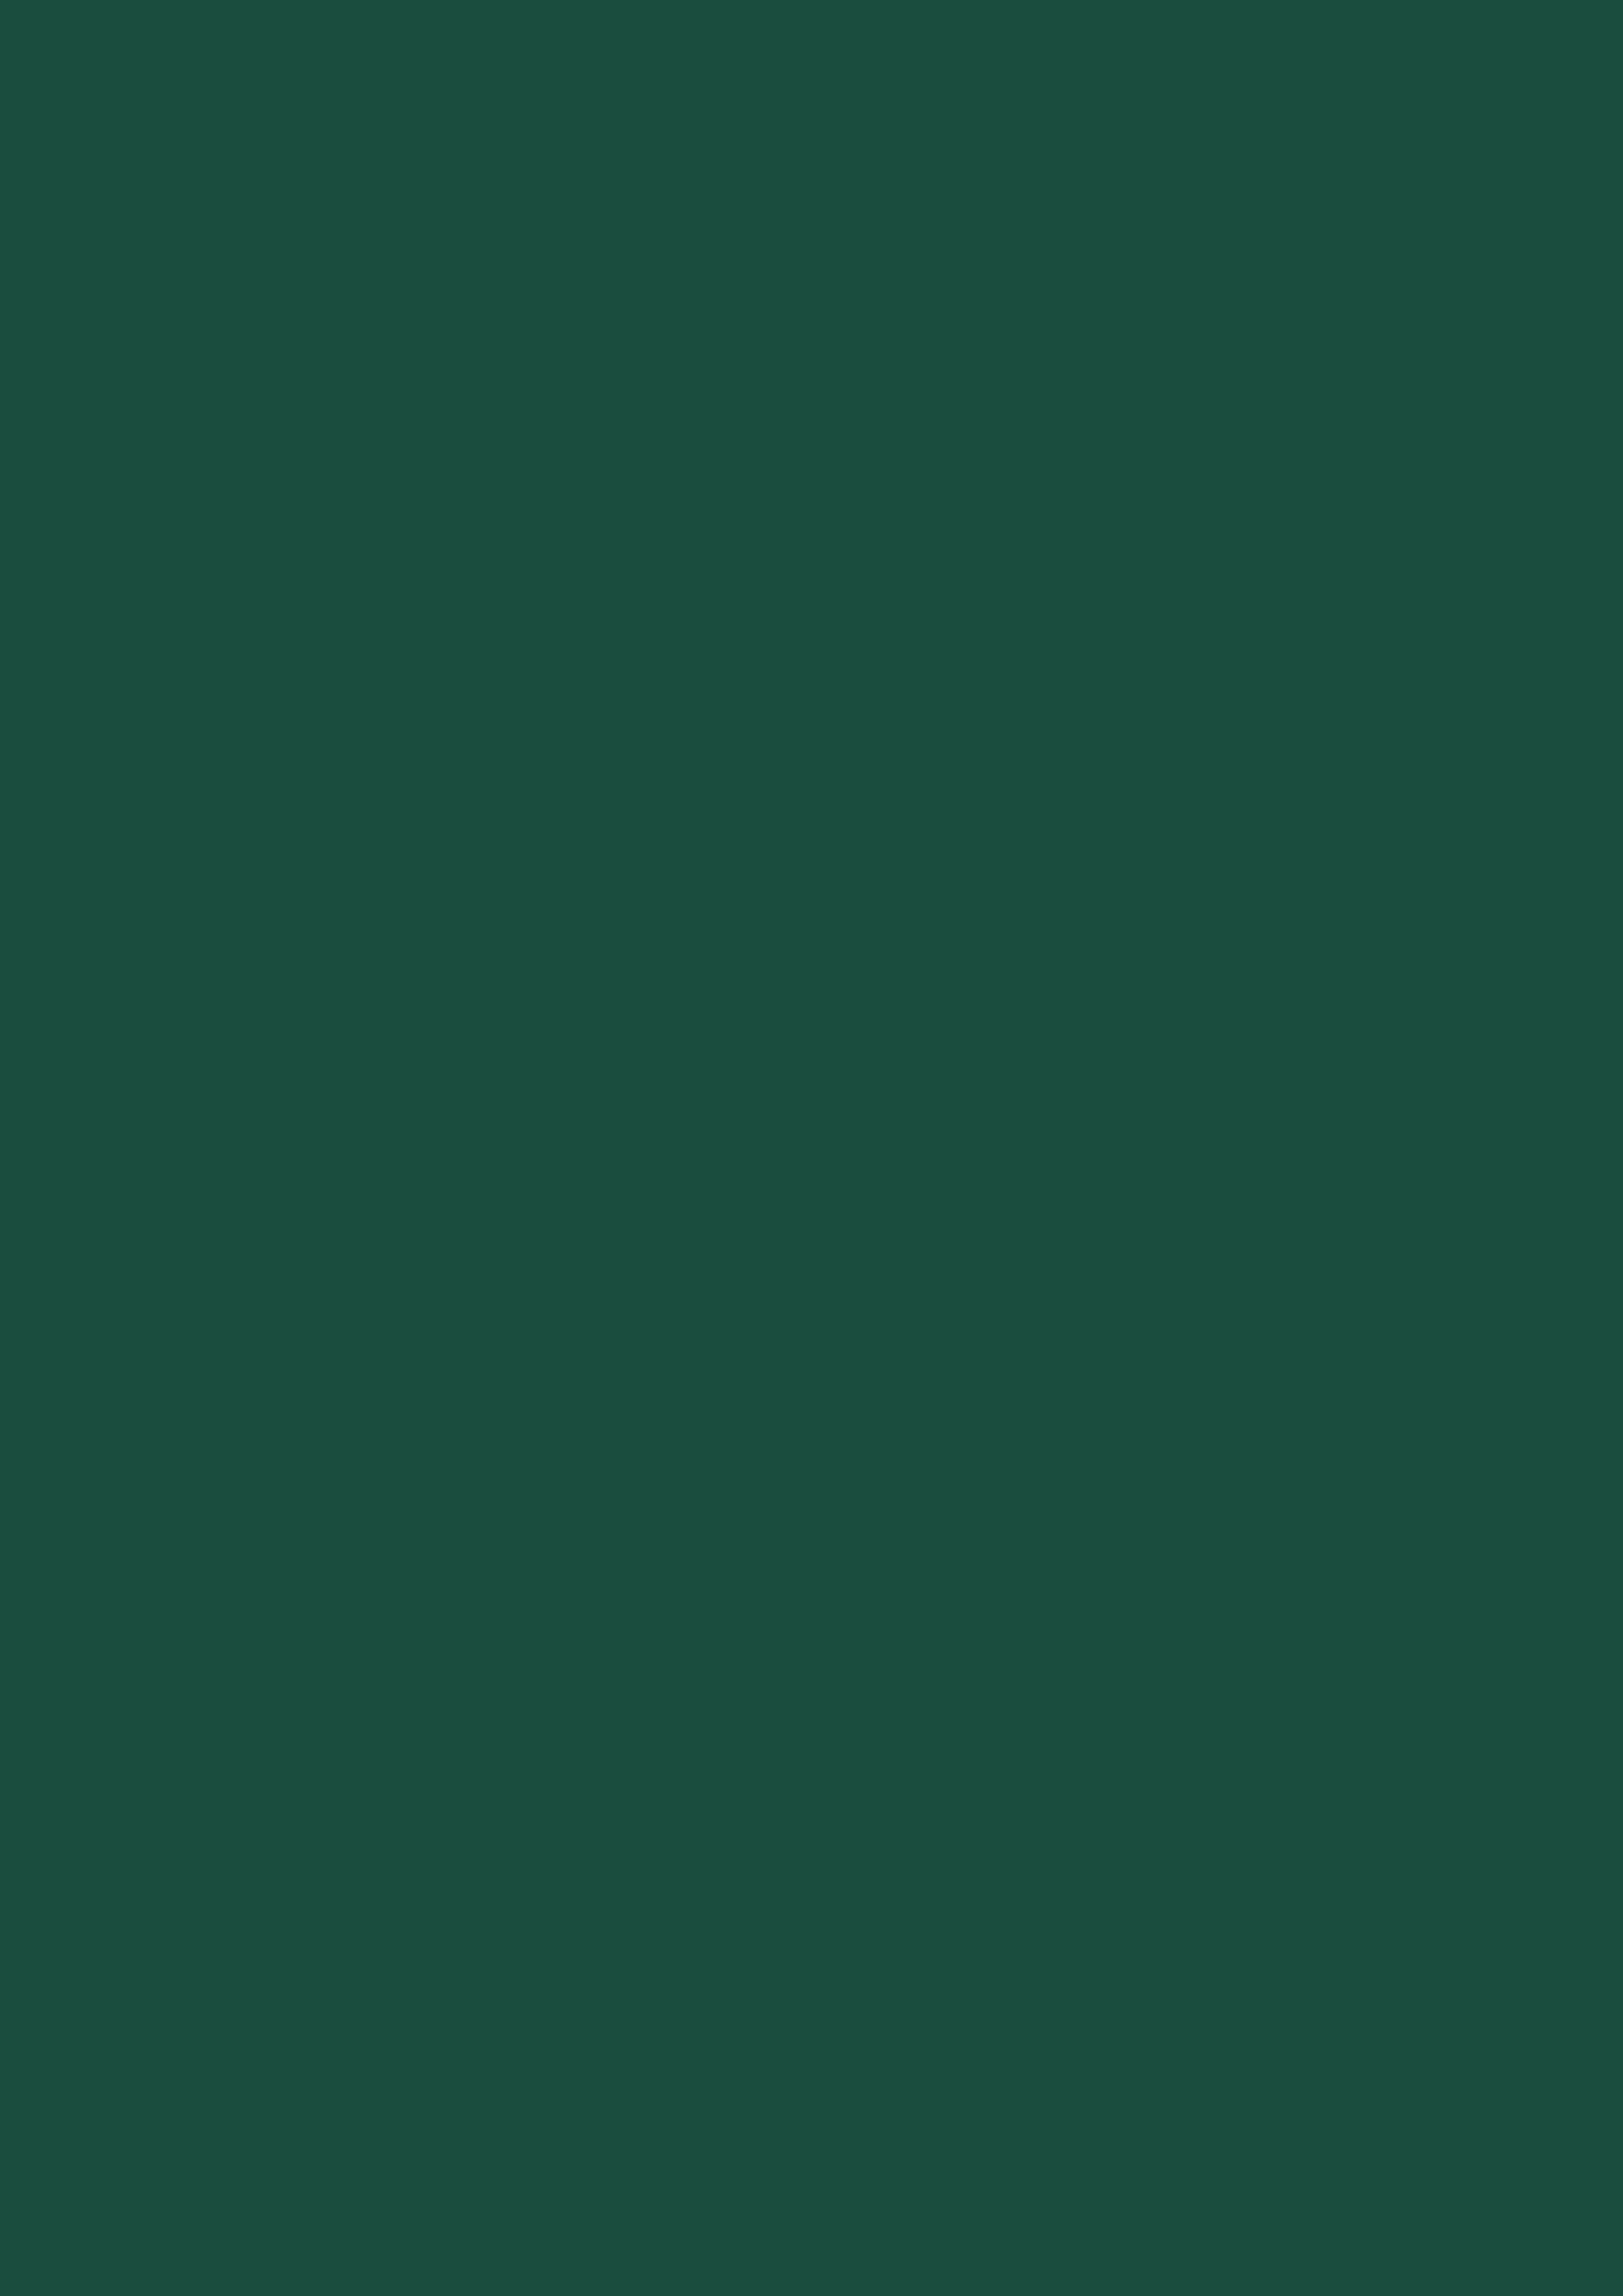 2480x3508 Brunswick Green Solid Color Background